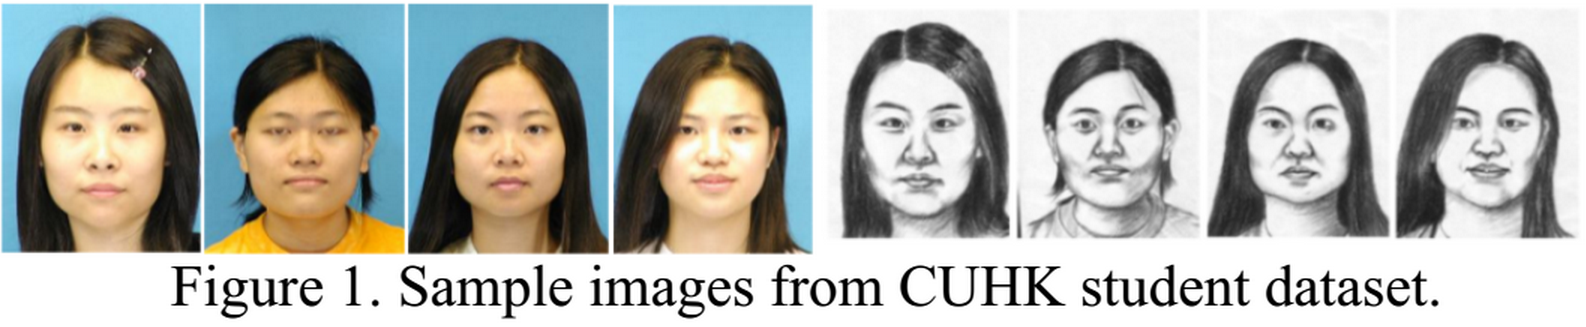 Face Recognition Sample Data